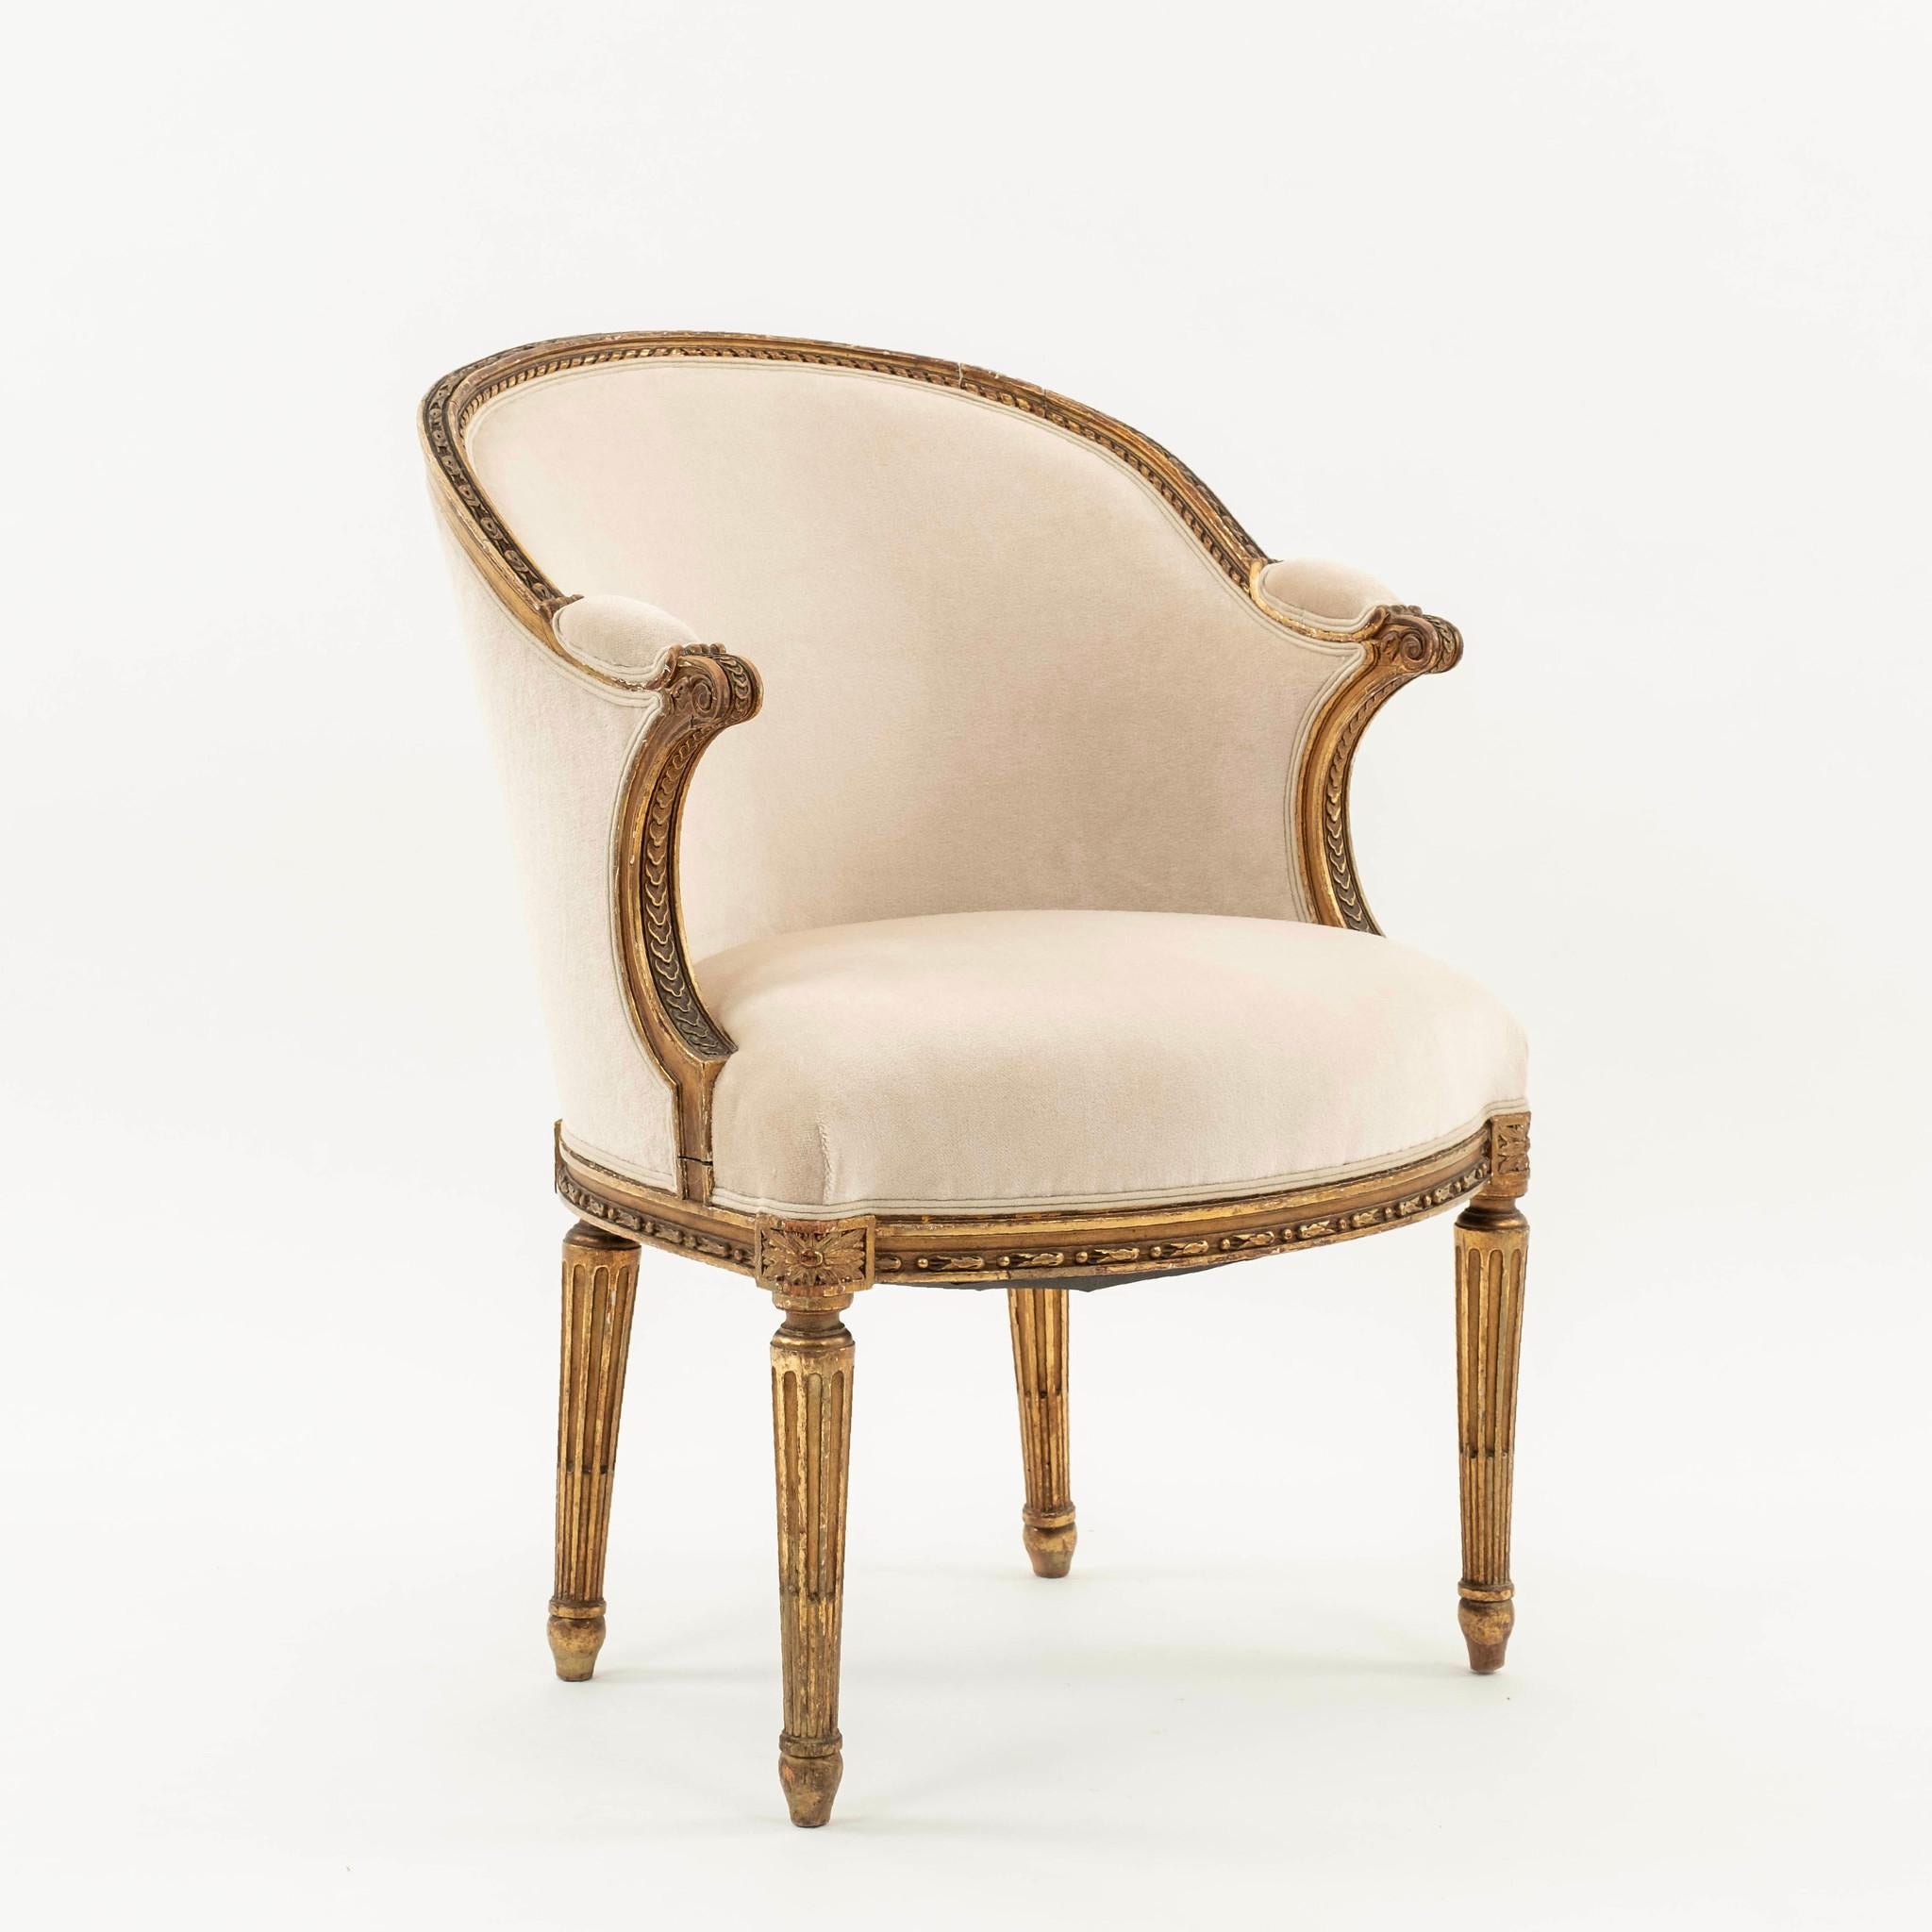 French 18th Century Louis XVI Giltwood Bergere